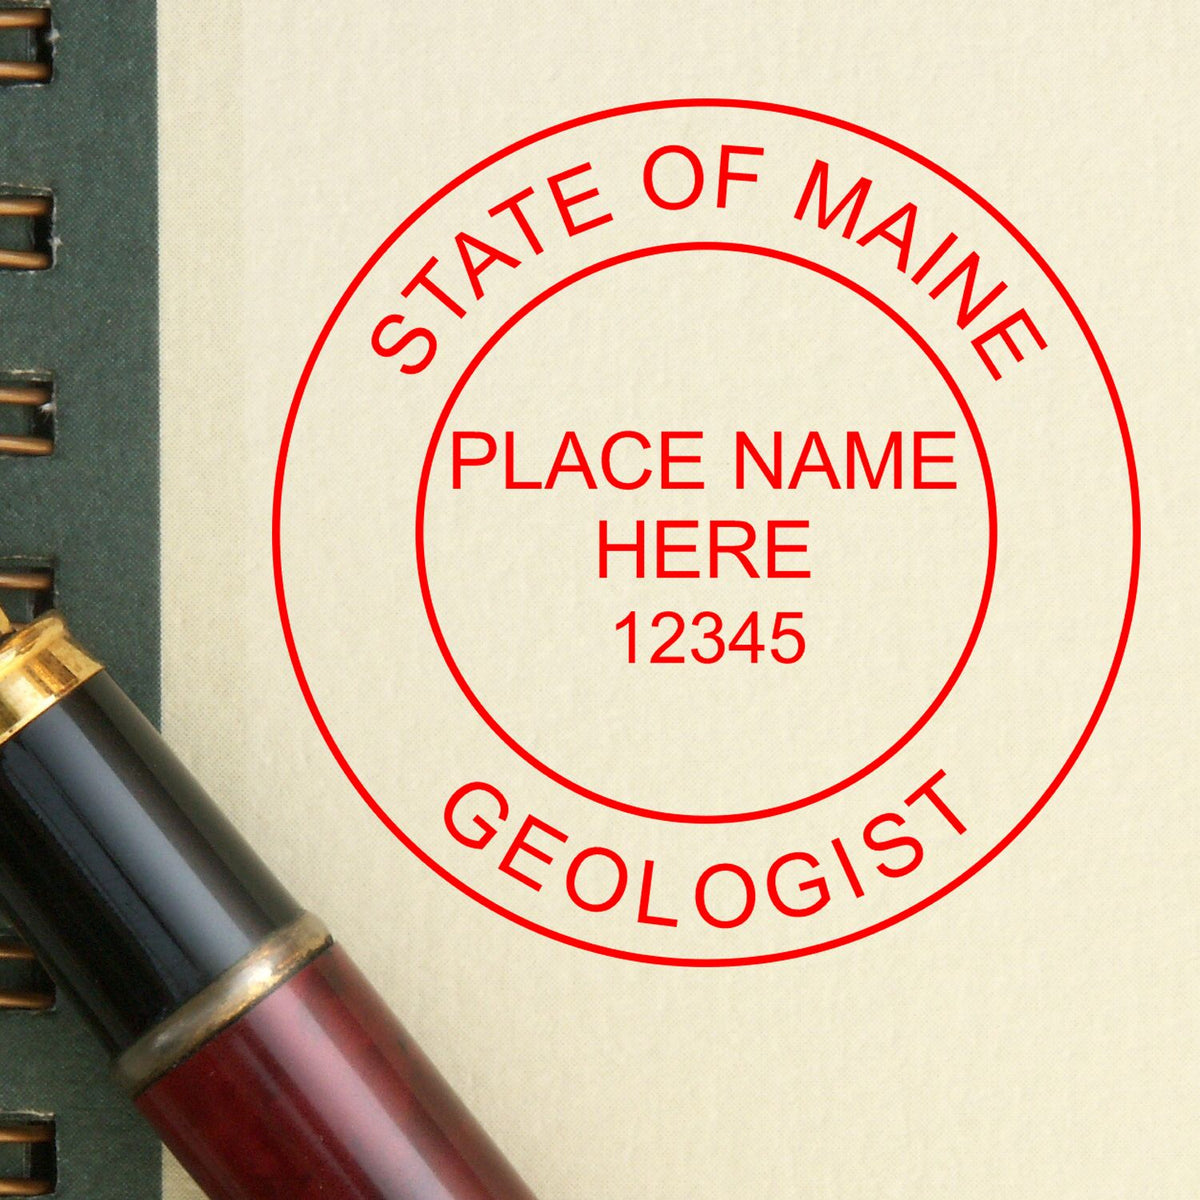 The Digital Maine Geologist Stamp, Electronic Seal for Maine Geologist stamp impression comes to life with a crisp, detailed image stamped on paper - showcasing true professional quality.